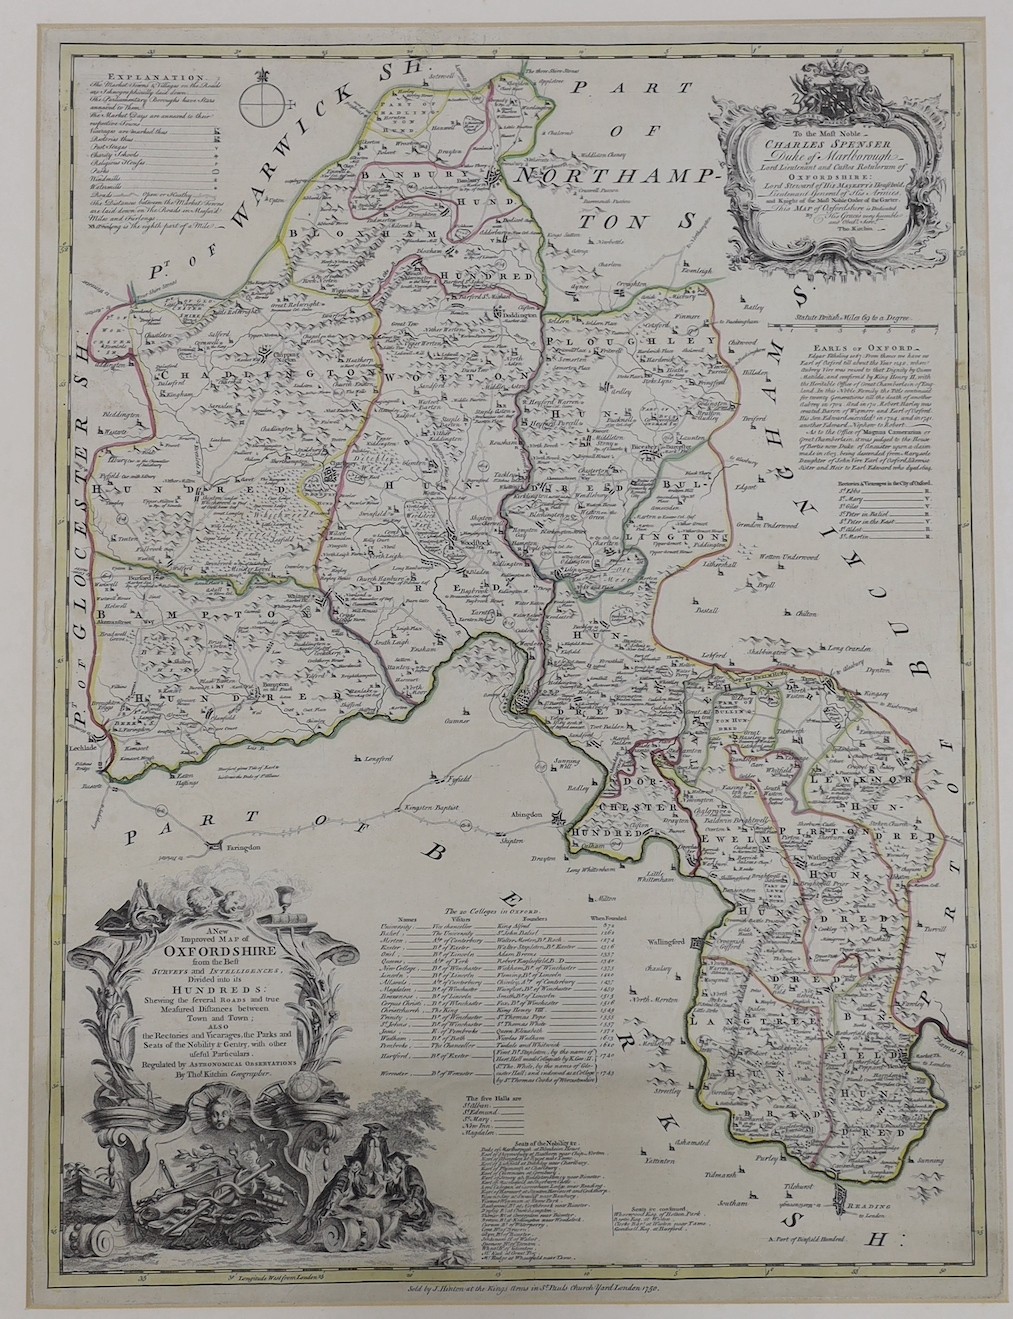 Thomas Kitchin, coloured engraving, A New and Improved Map of Oxfordshire, sold by J. Hinton, - Image 2 of 5